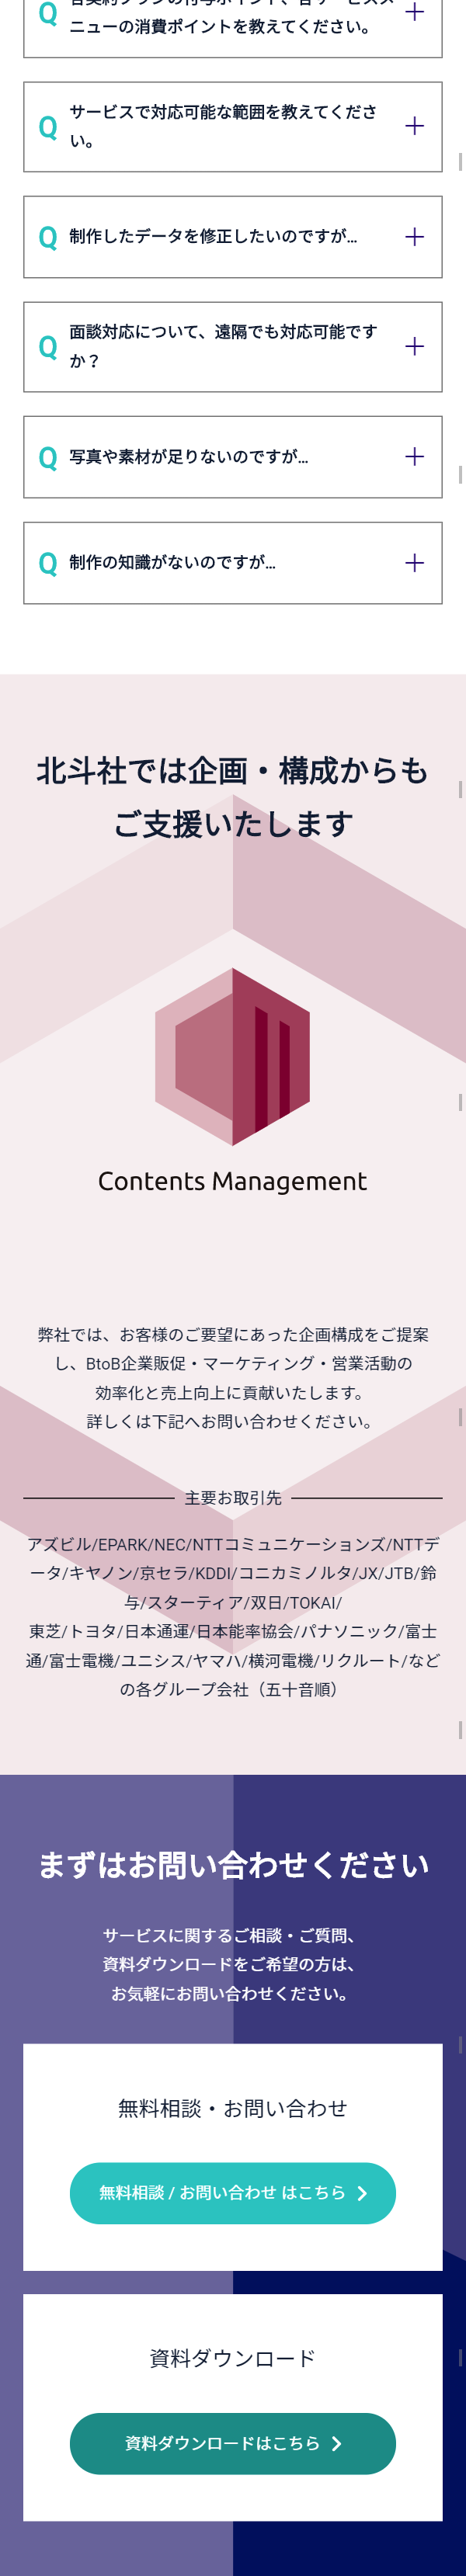 Contents Stock_sp_2